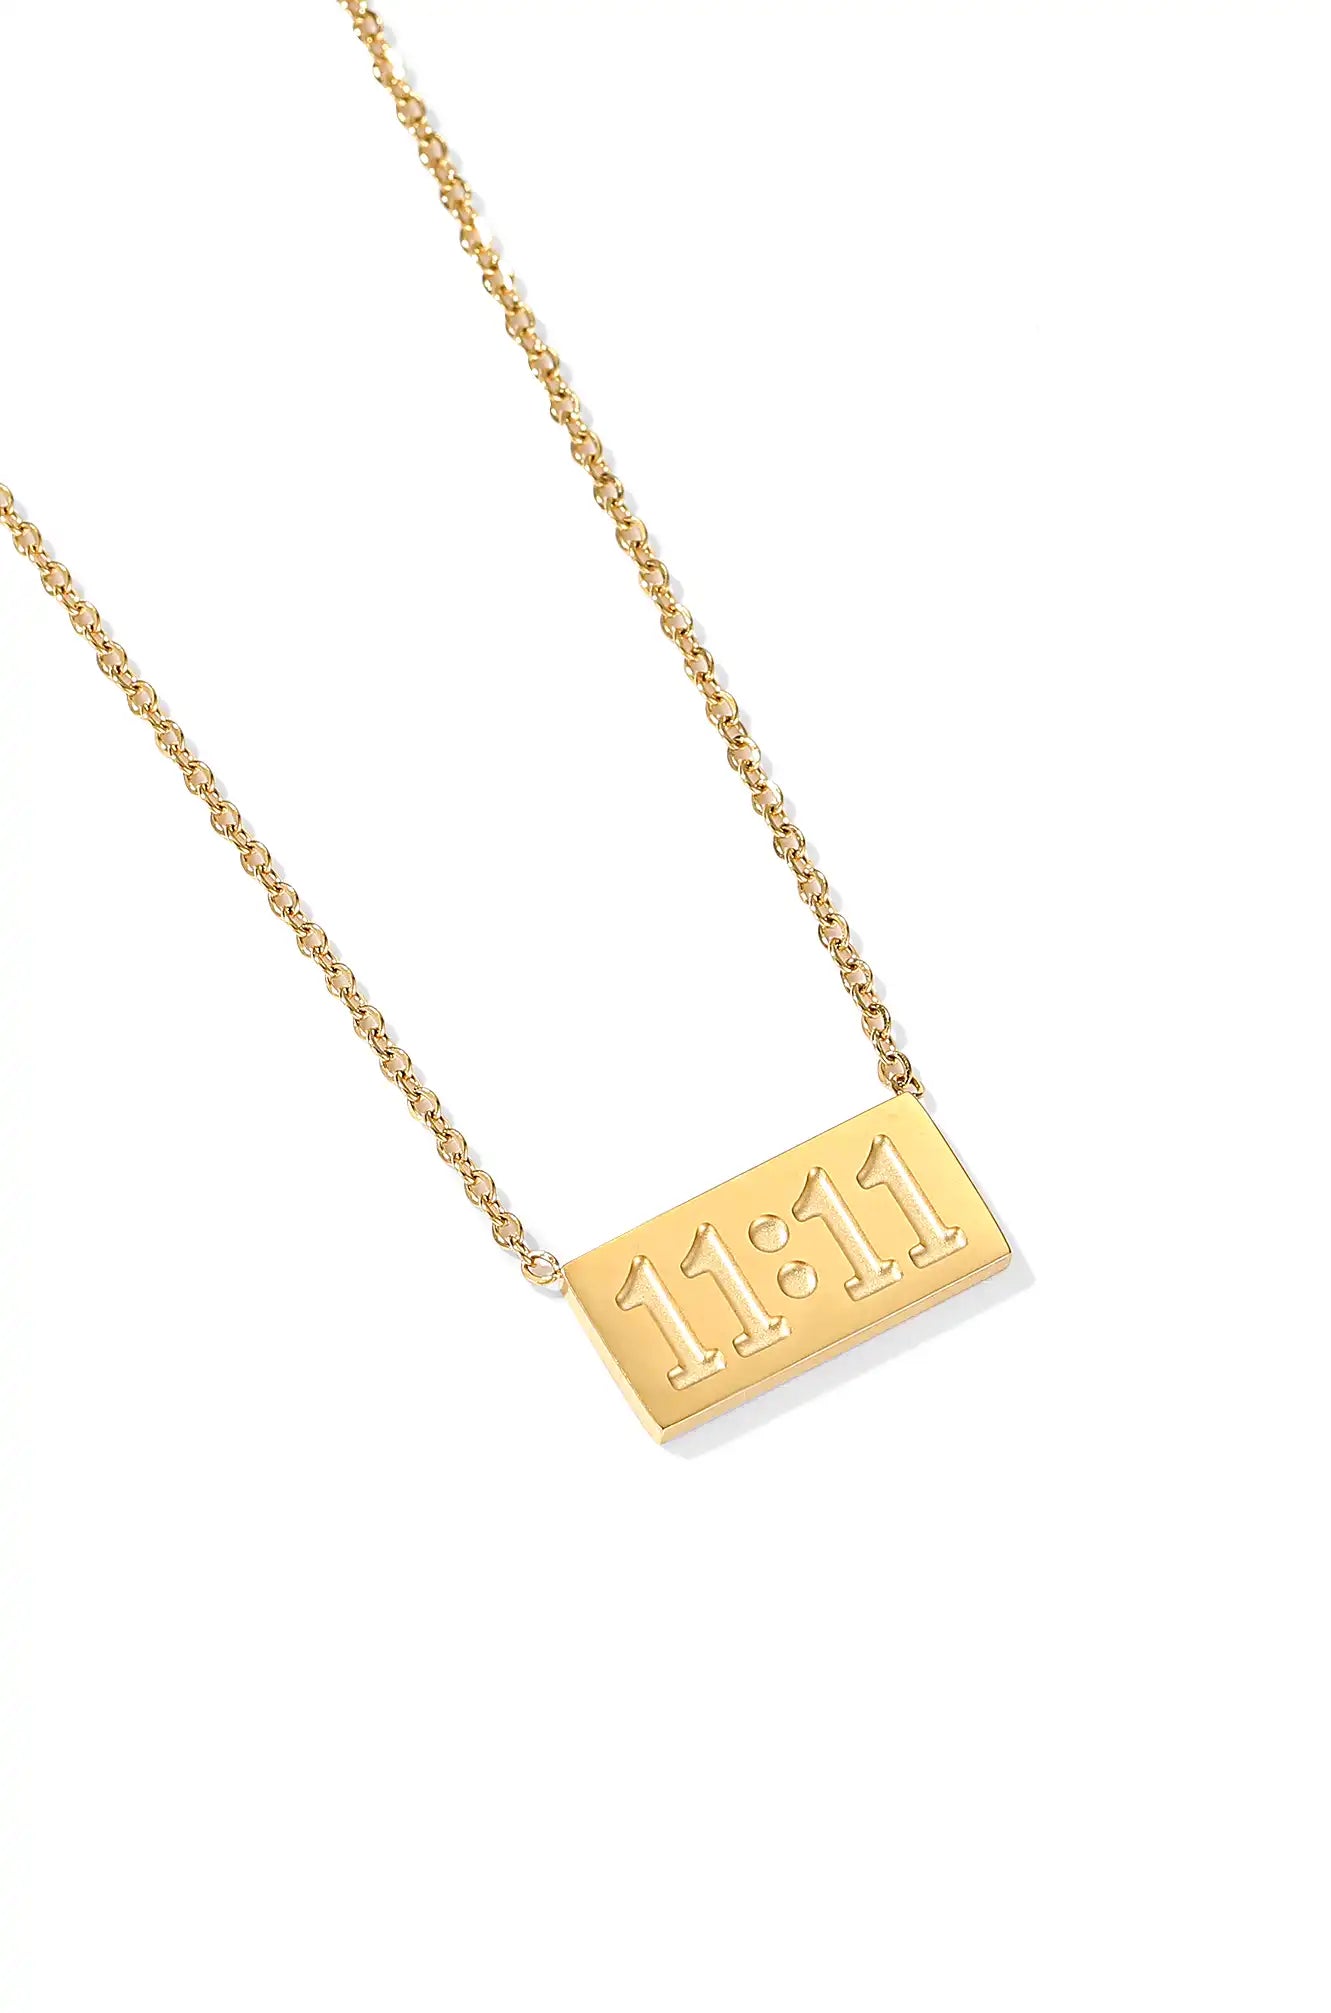 11 11 necklace